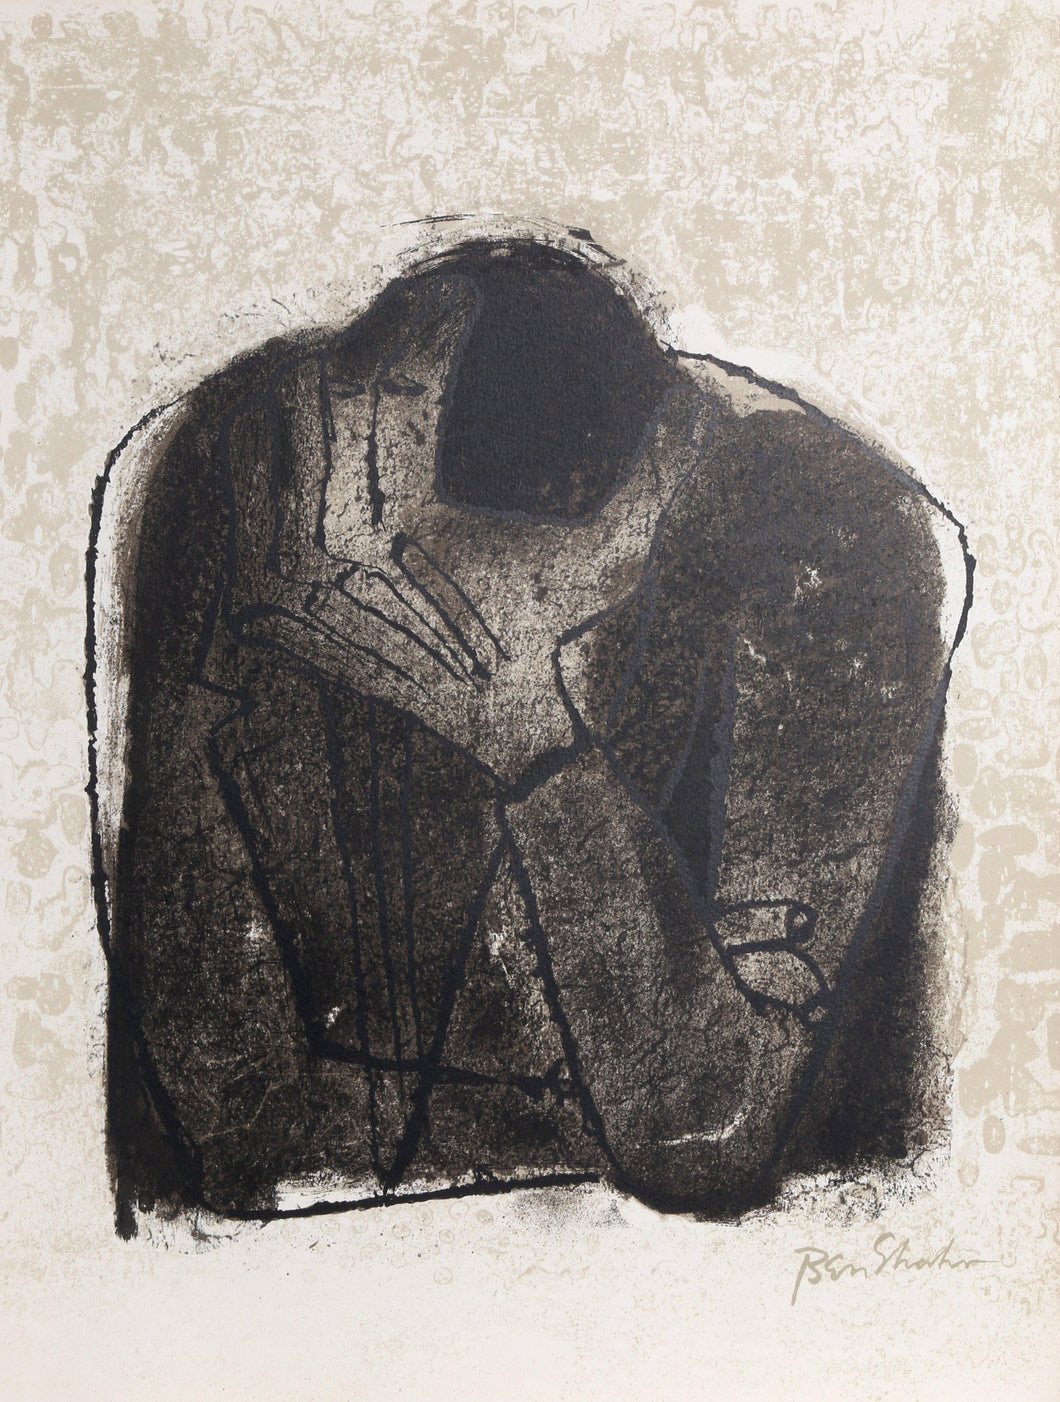 Beside the Dead from the Rilke Portfolio Lithograph | Ben Shahn,{{product.type}}